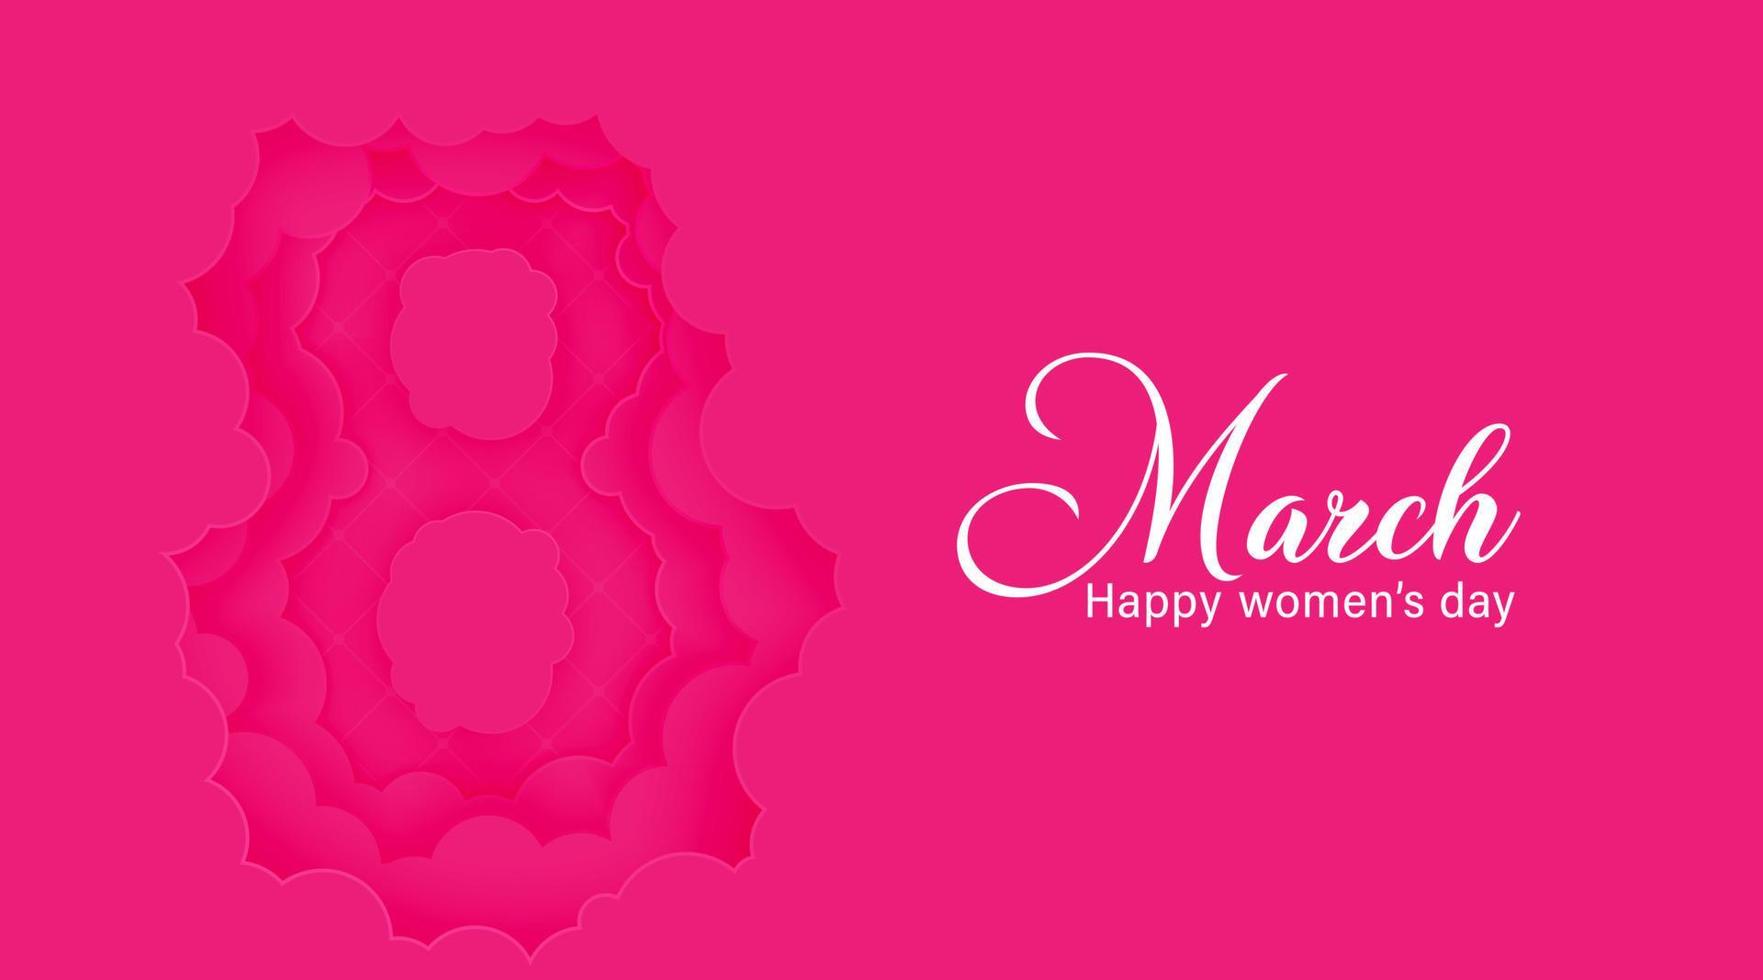 March 8 symbol in paper cut style with shadows. International Women's day pink background. Vector illustration. Place for your text.